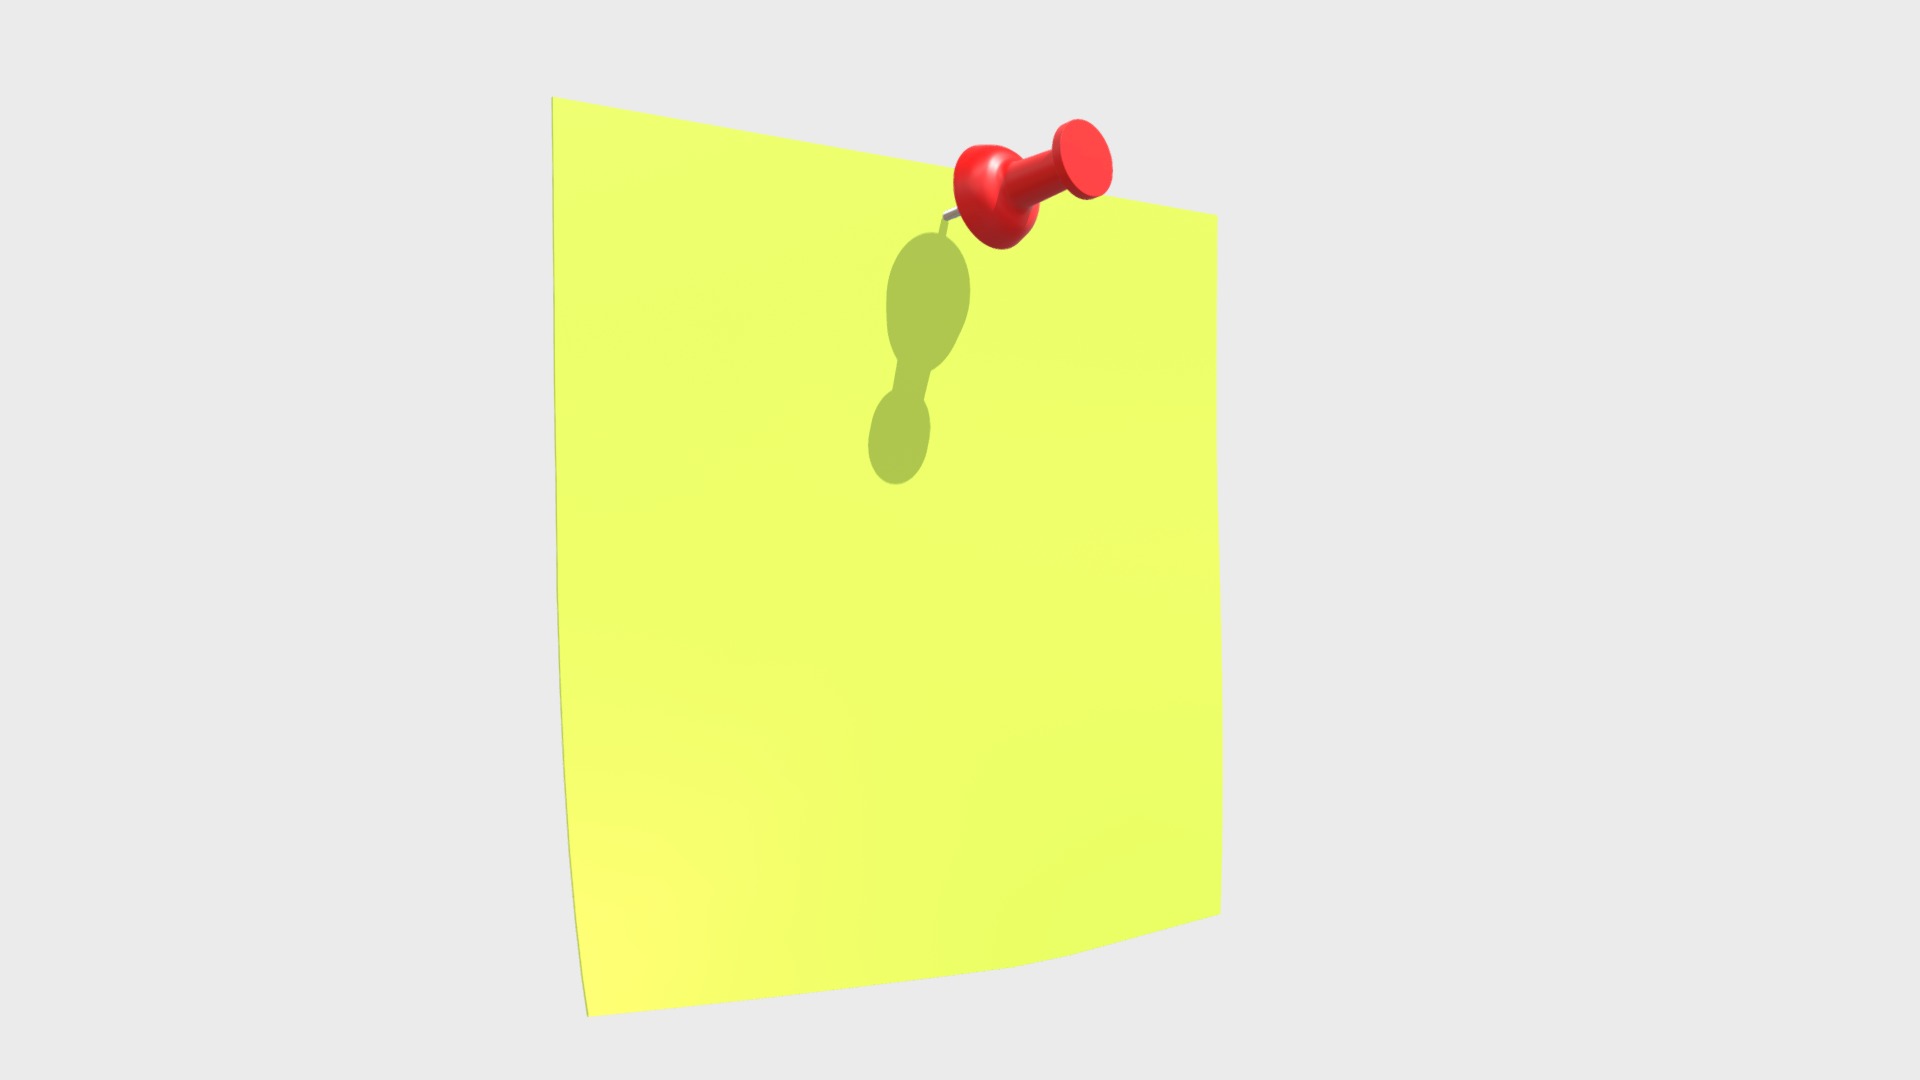 3D model Memo note - This is a 3D model of the Memo note. The 3D model is about a yellow square with red dots and a green apple on it.